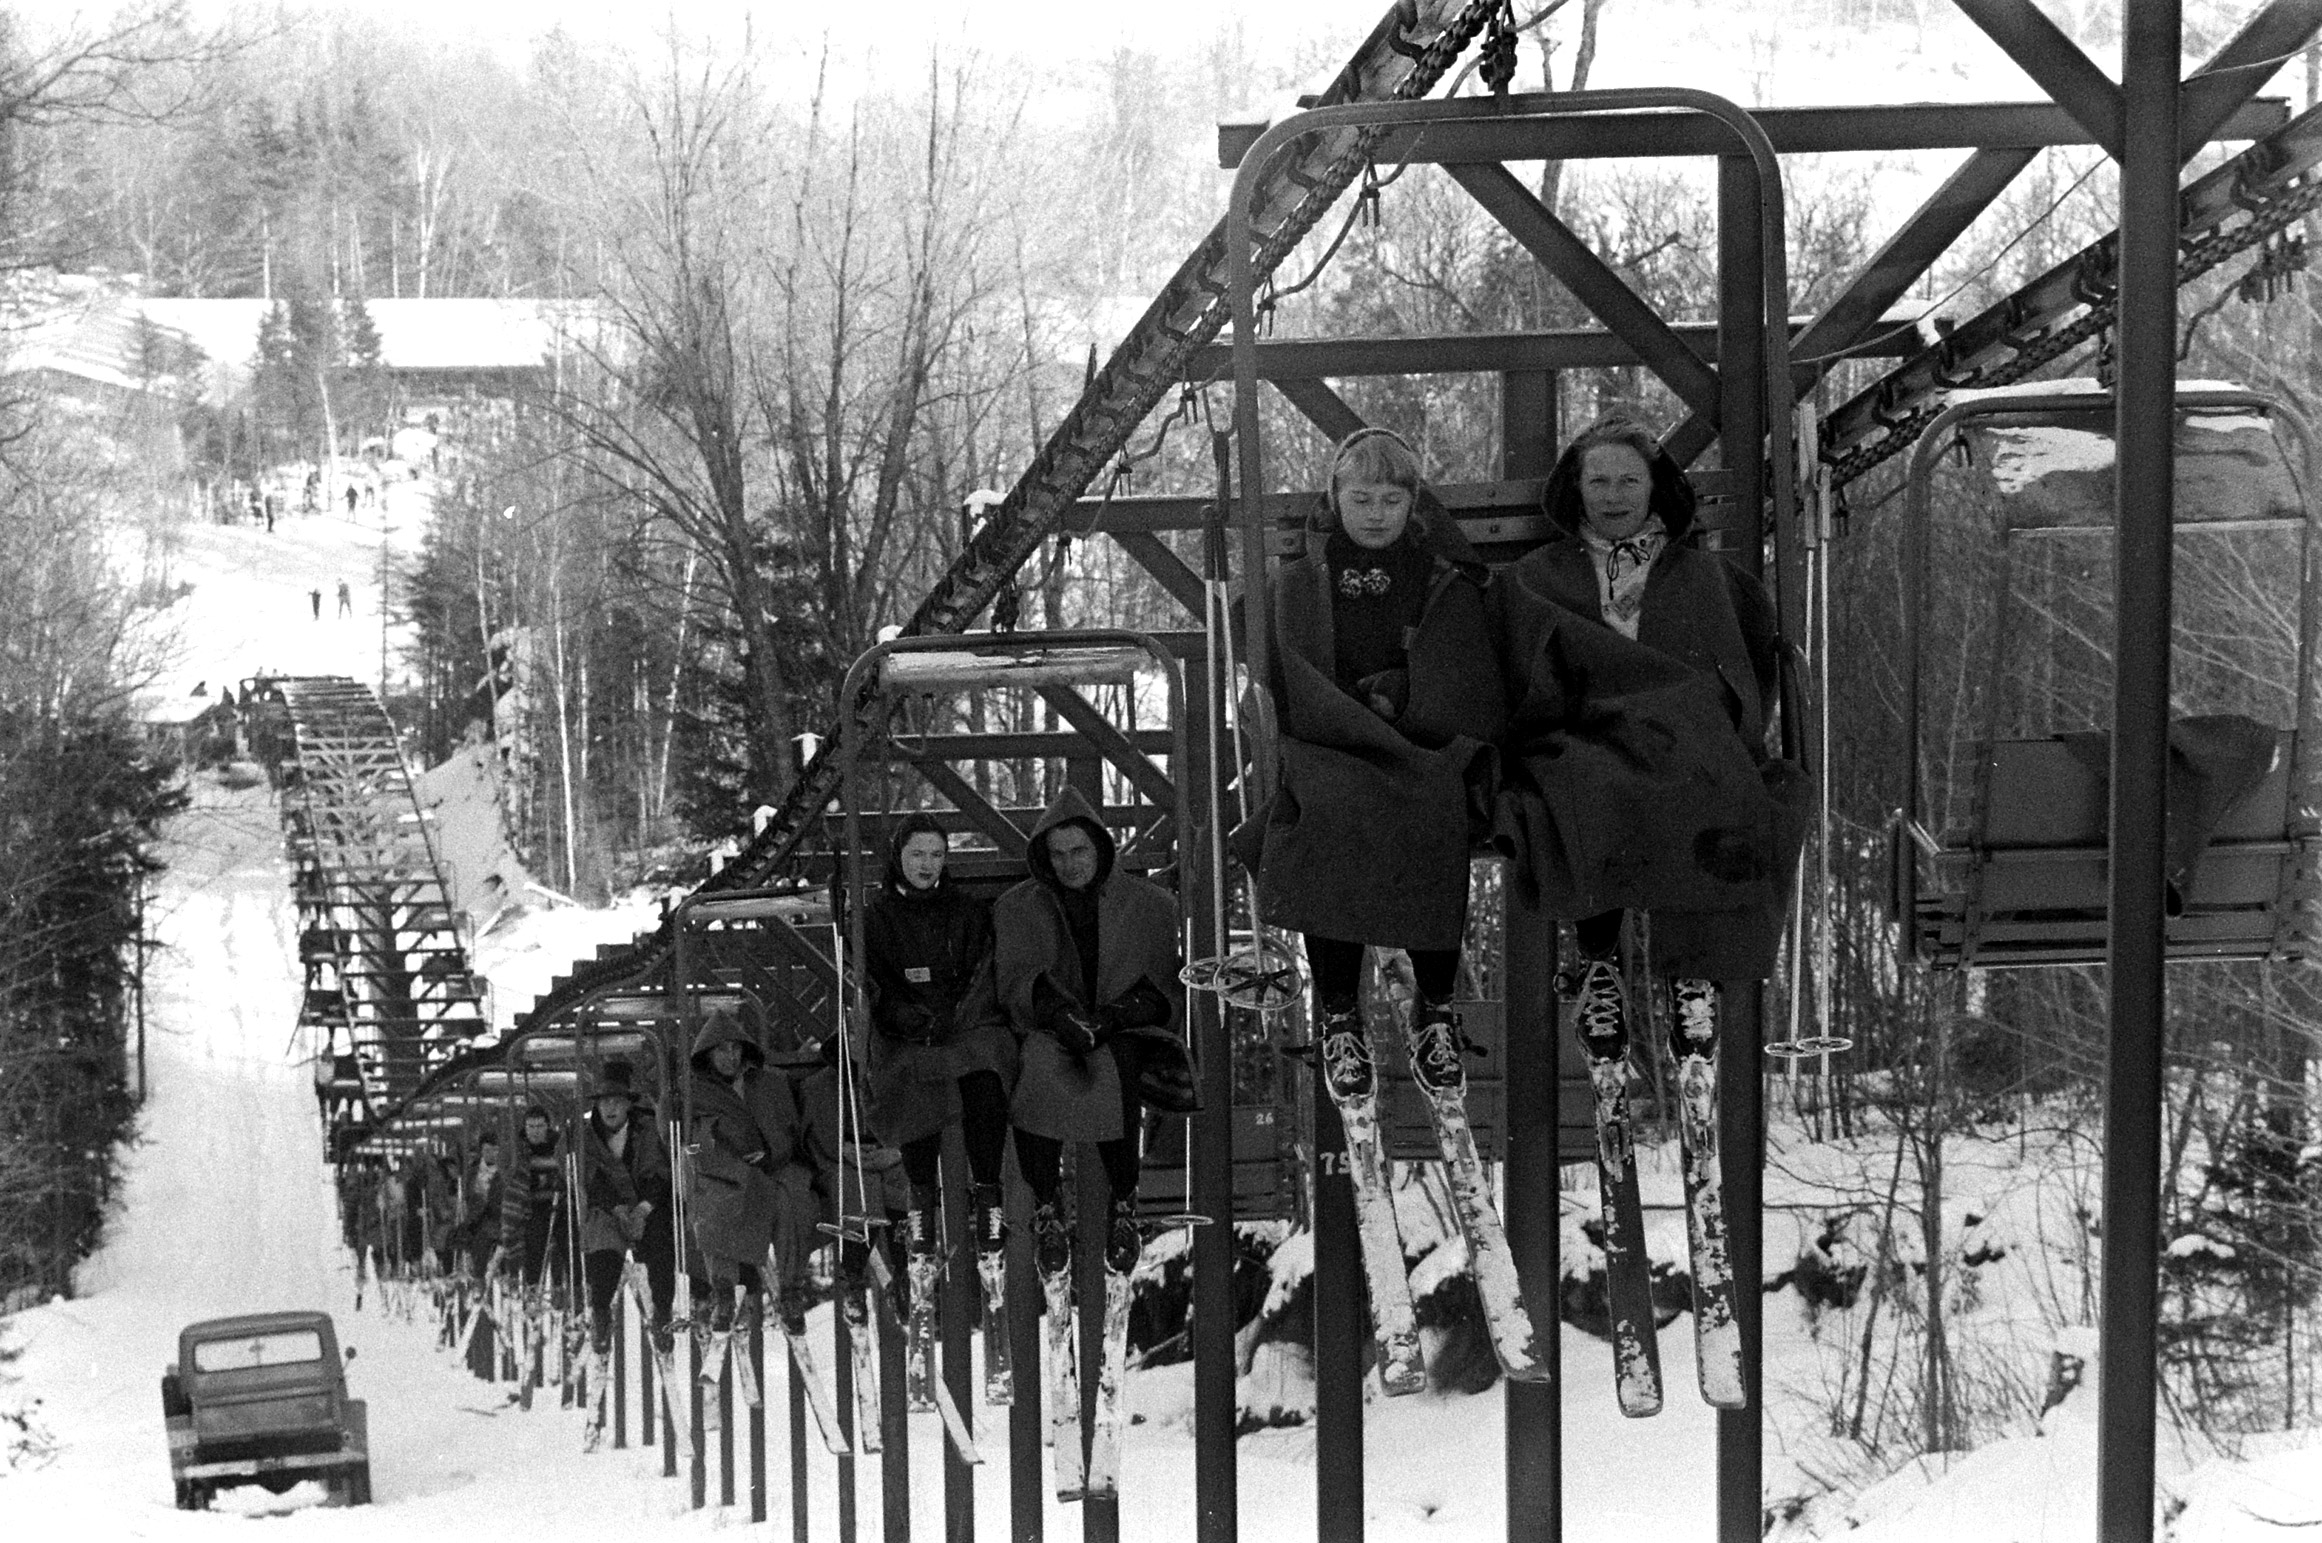 Skiers at Mount Snow in Vermont, 1957.